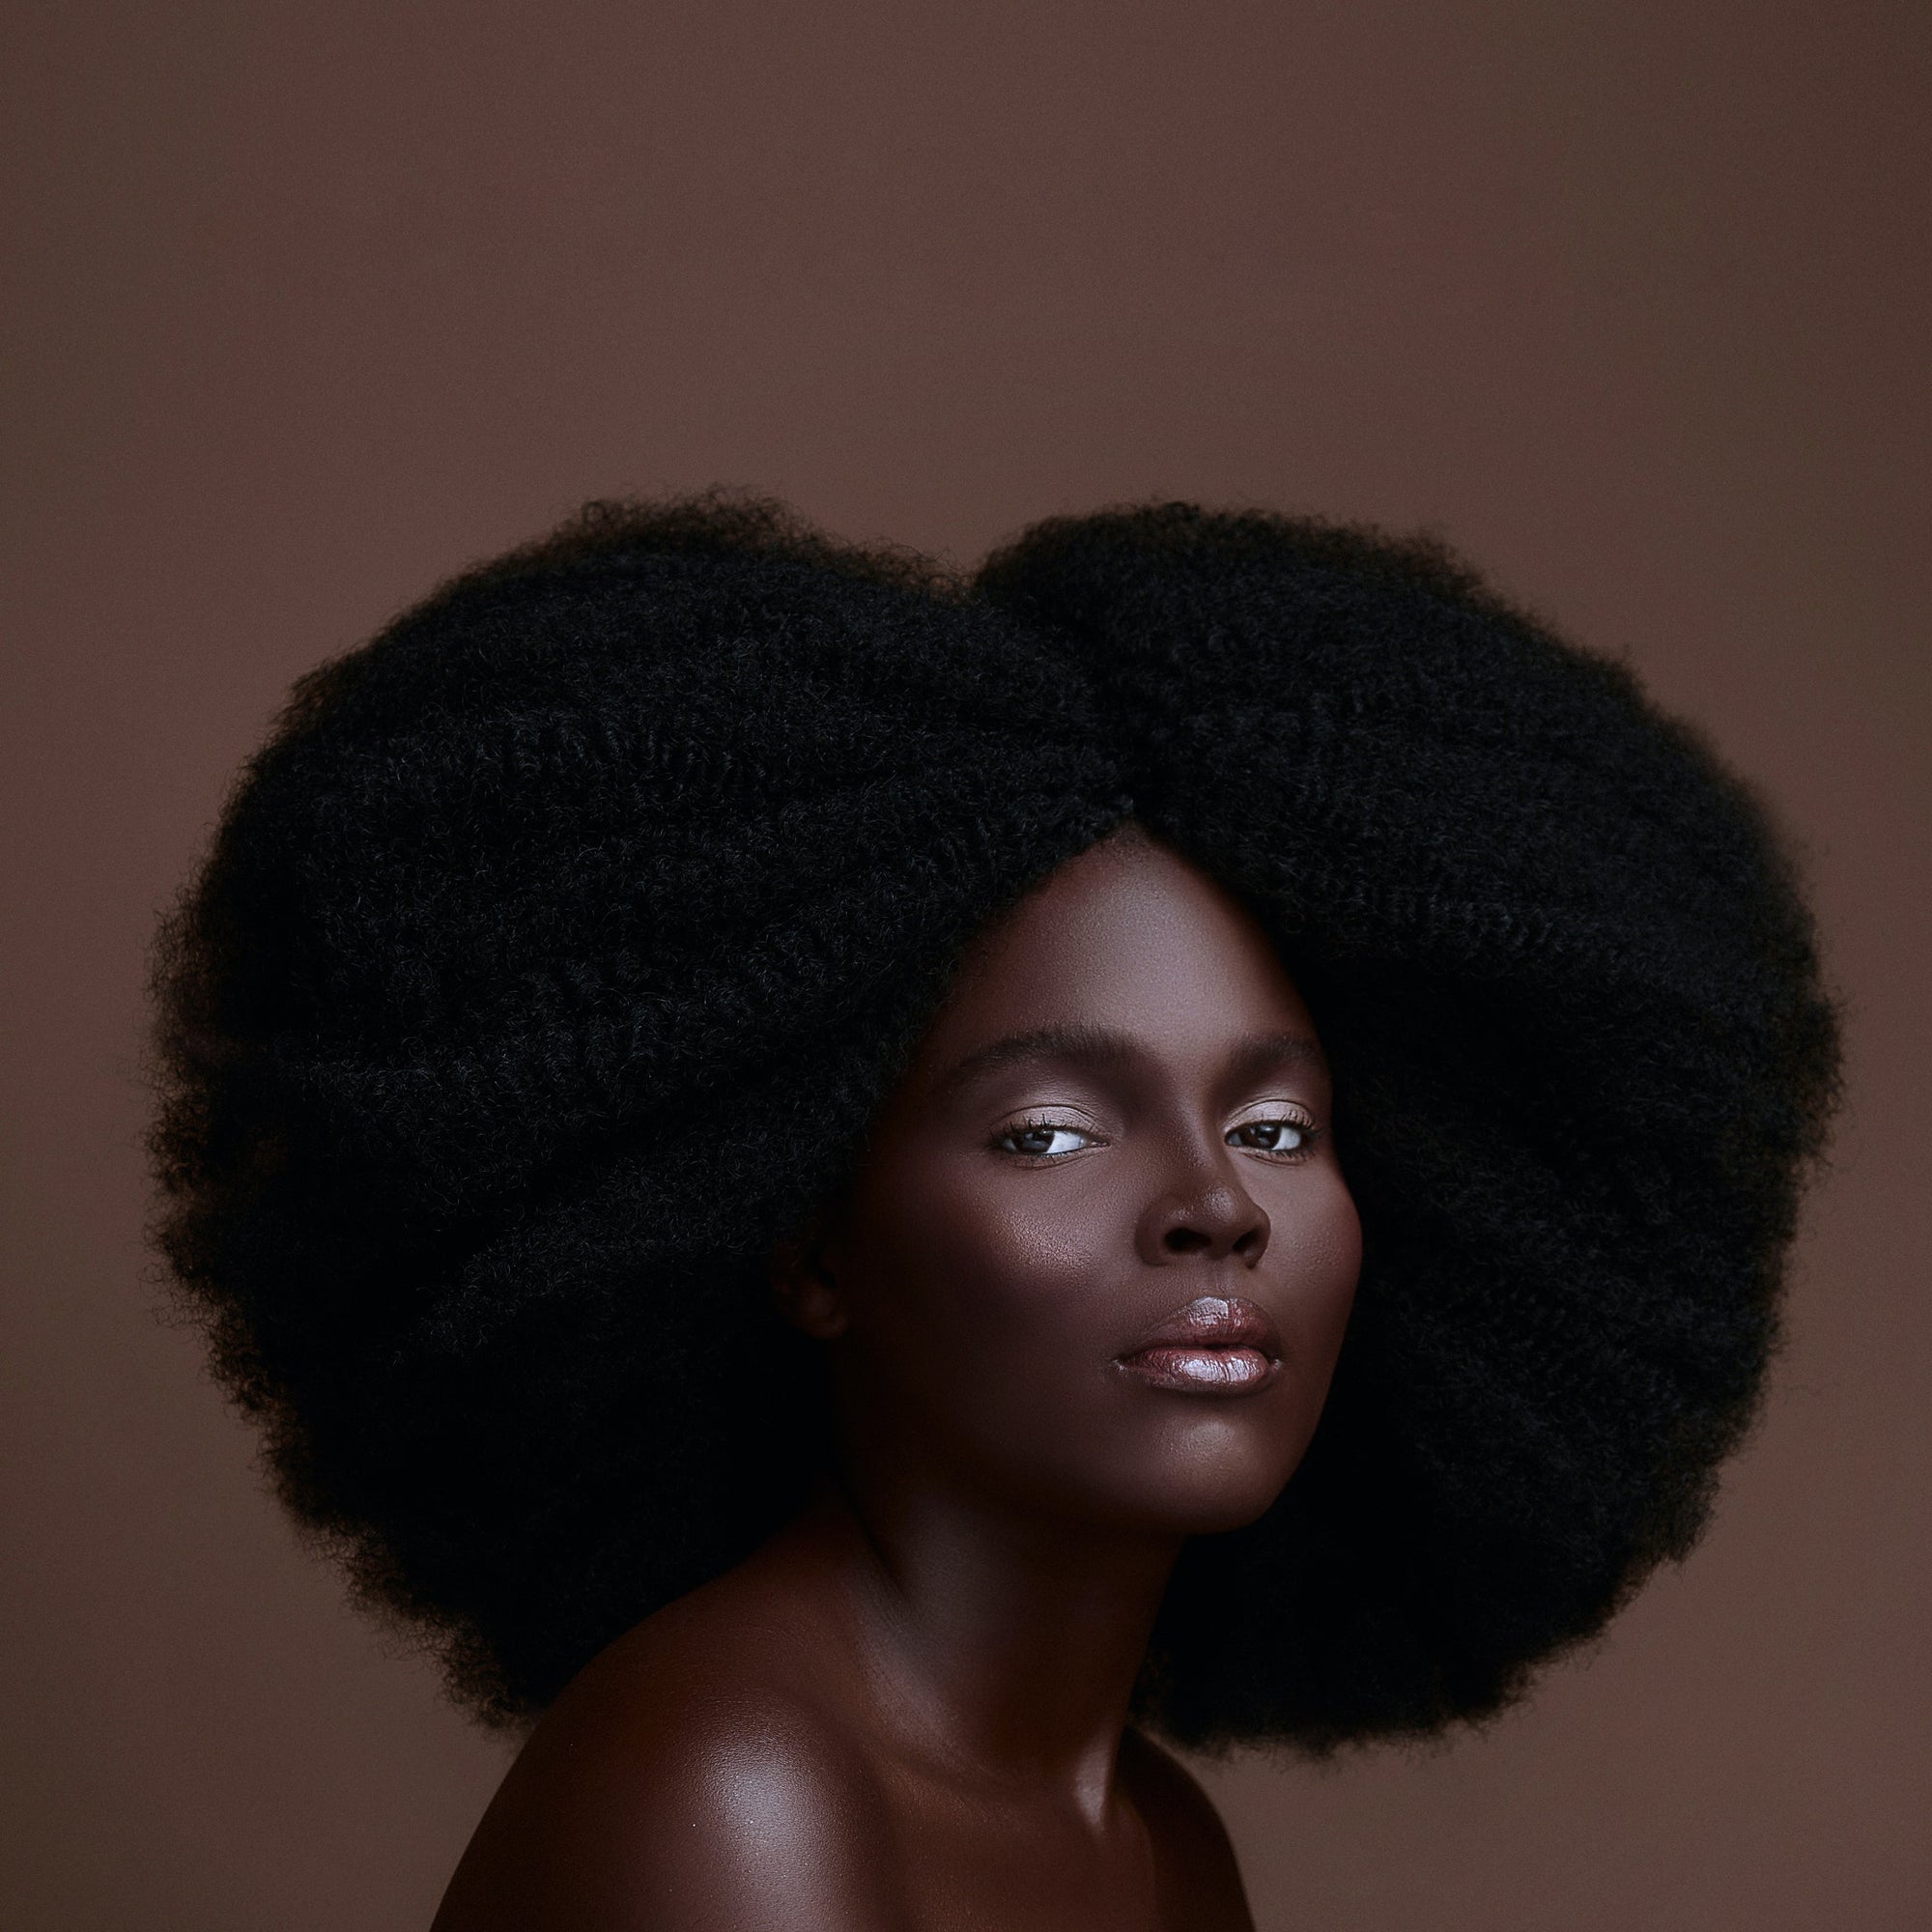 From Afro to Blowout: Top 5 Natural Hair Transformations for Black Women